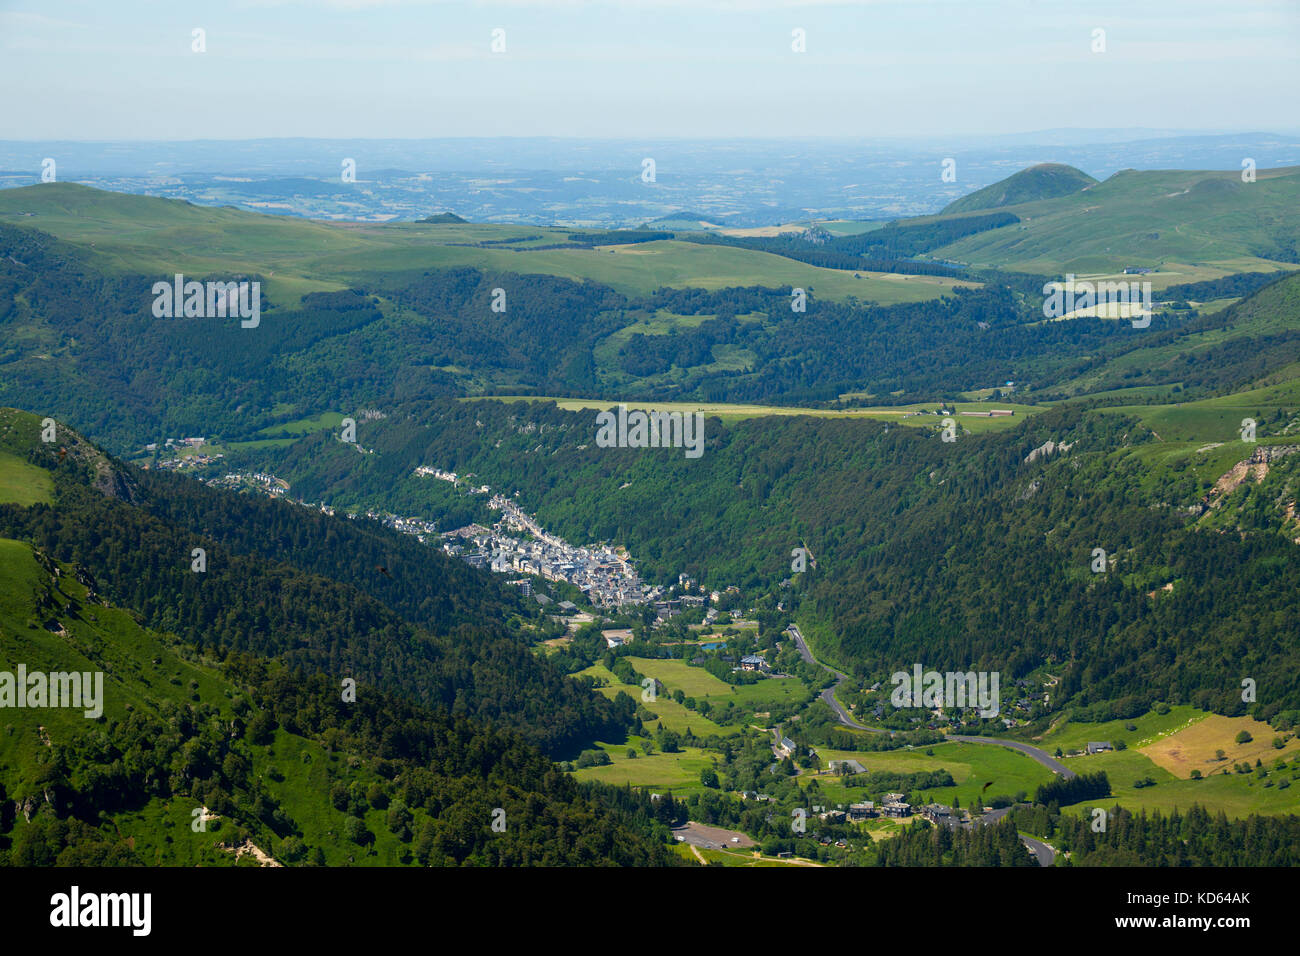 The 'Mont Dore' (63): the town in the valley, viewed from the mountain 'Puy de Sancy'. (Not available for postcard production). Stock Photo